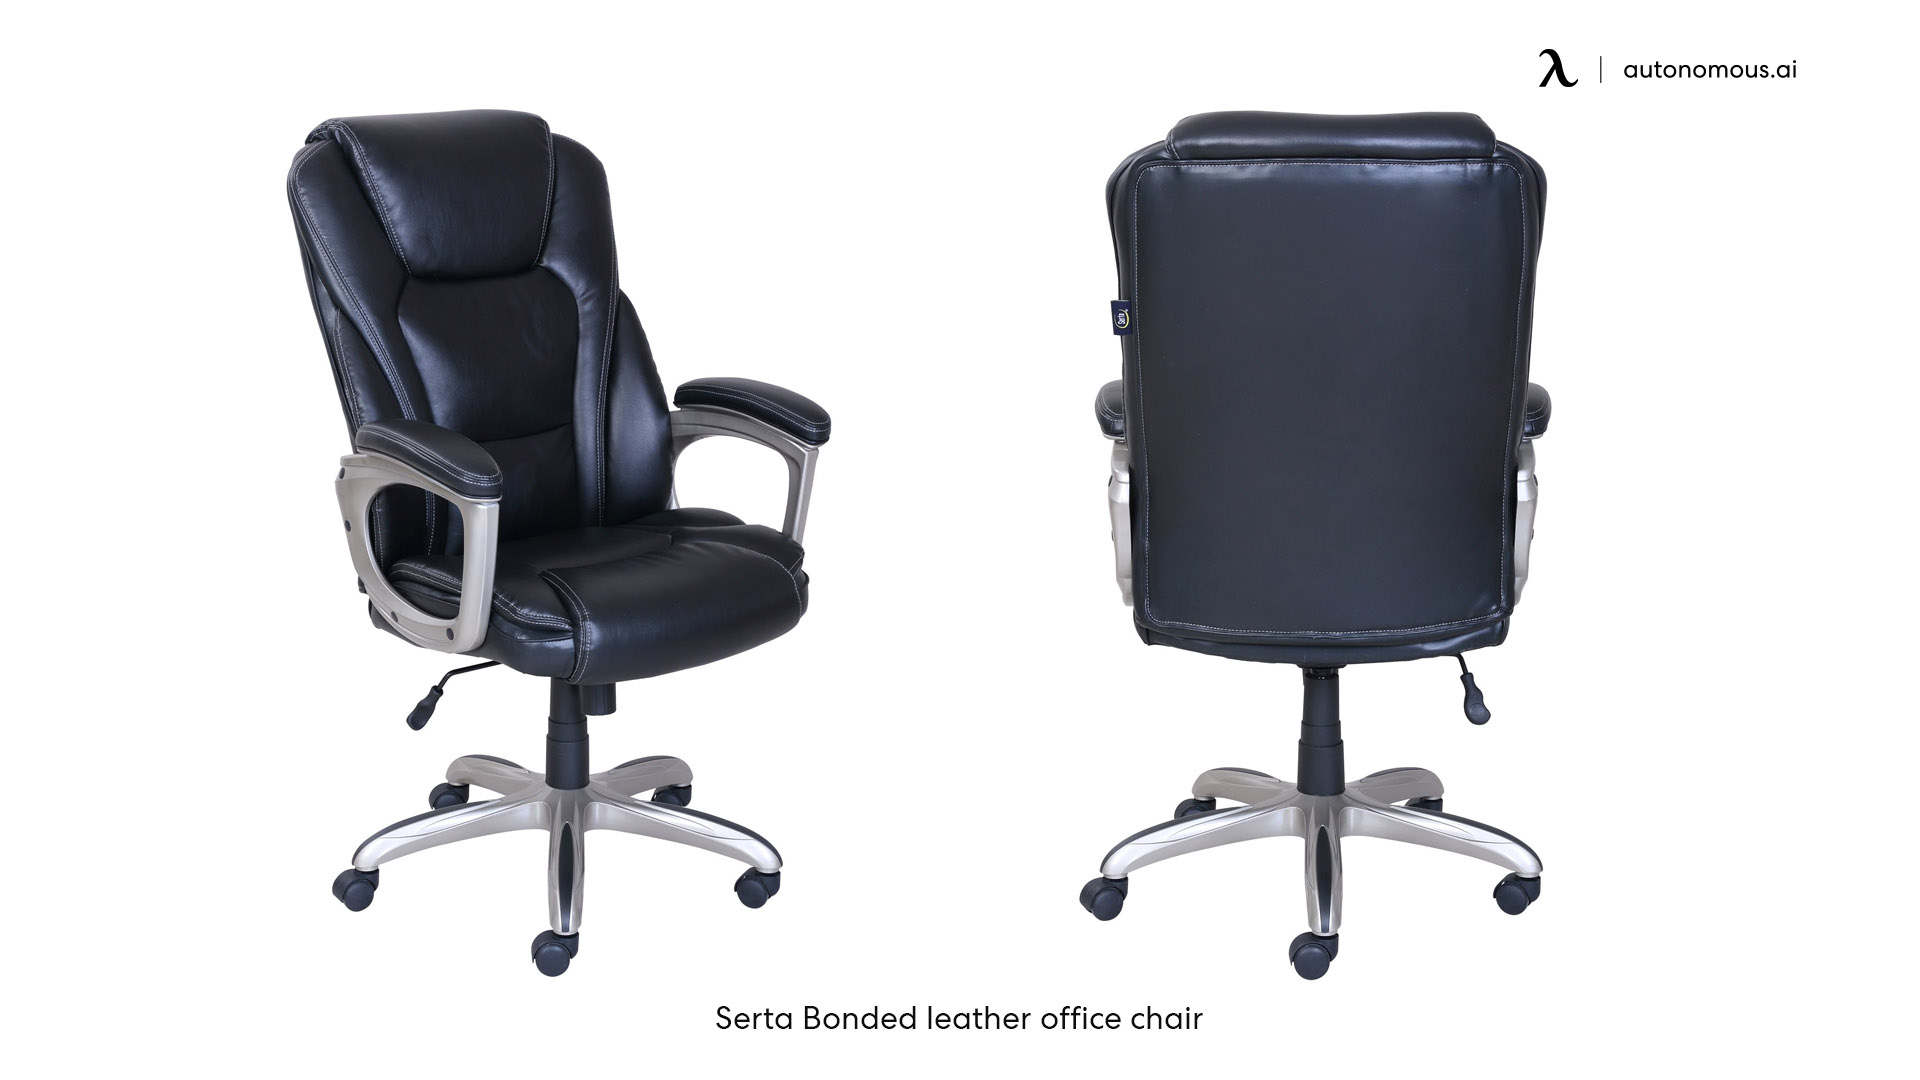 Serta Bonded leather office chair